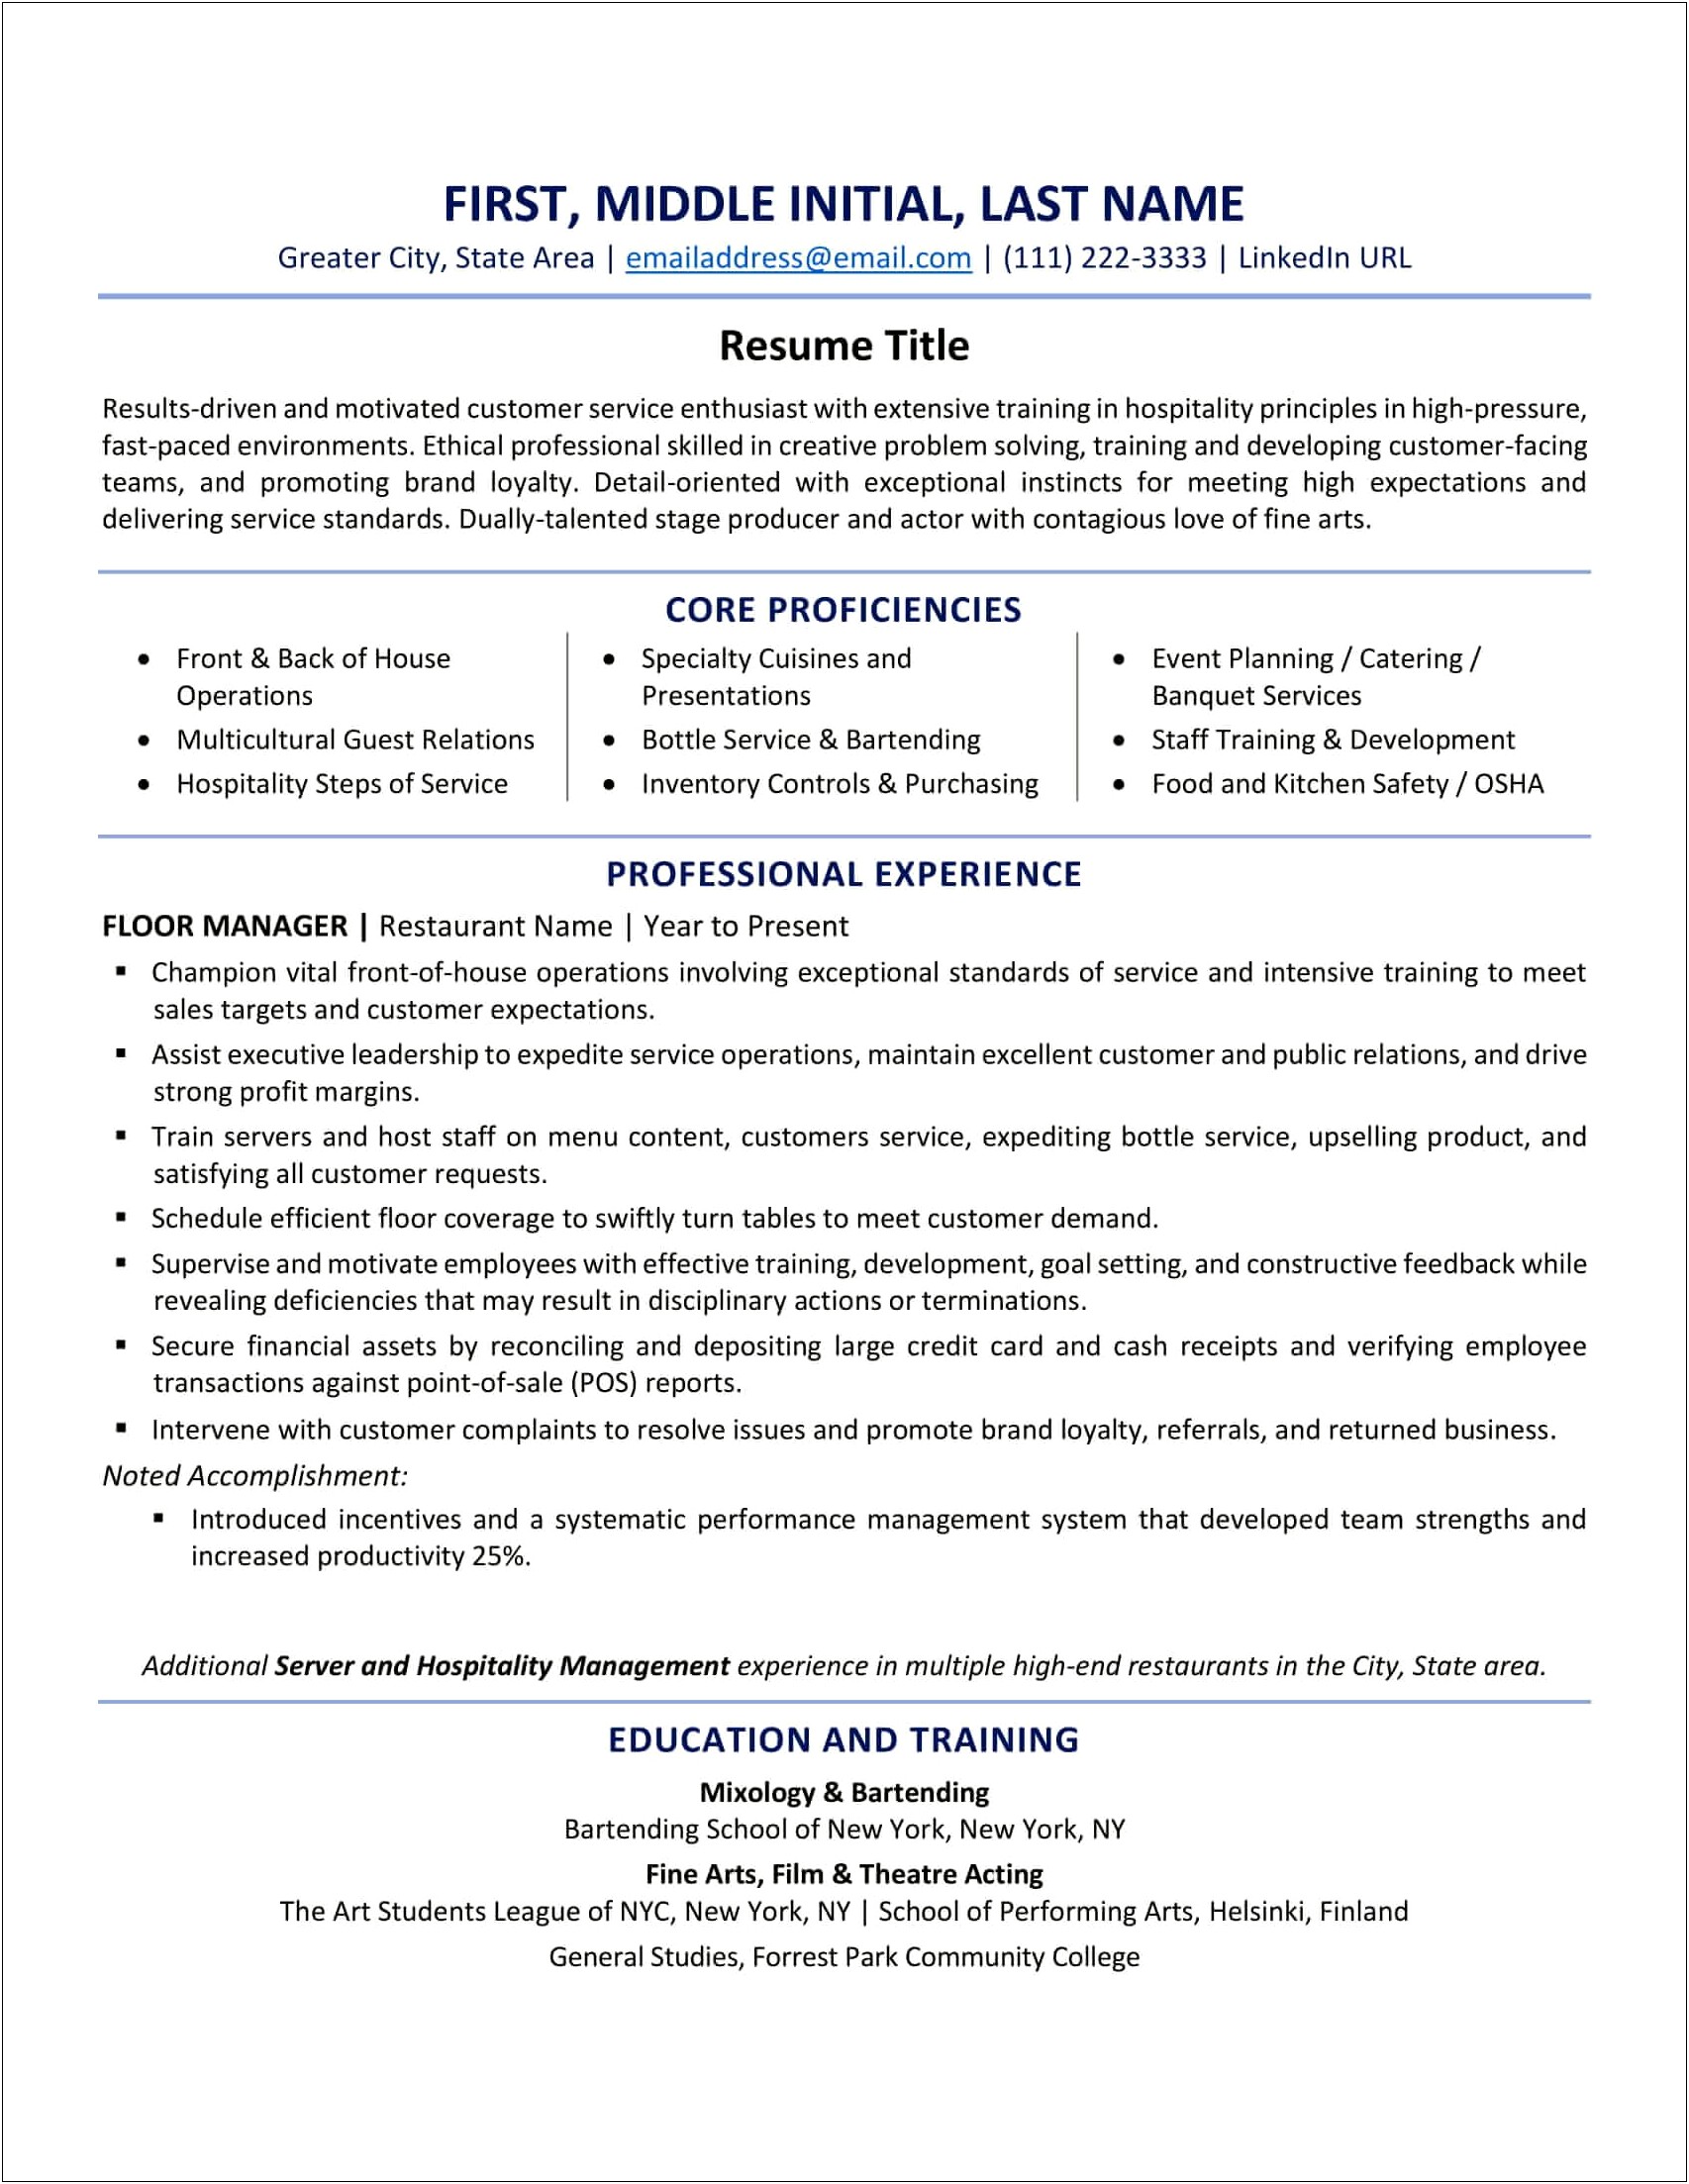 Qualifications Summary Section In Functional Resume